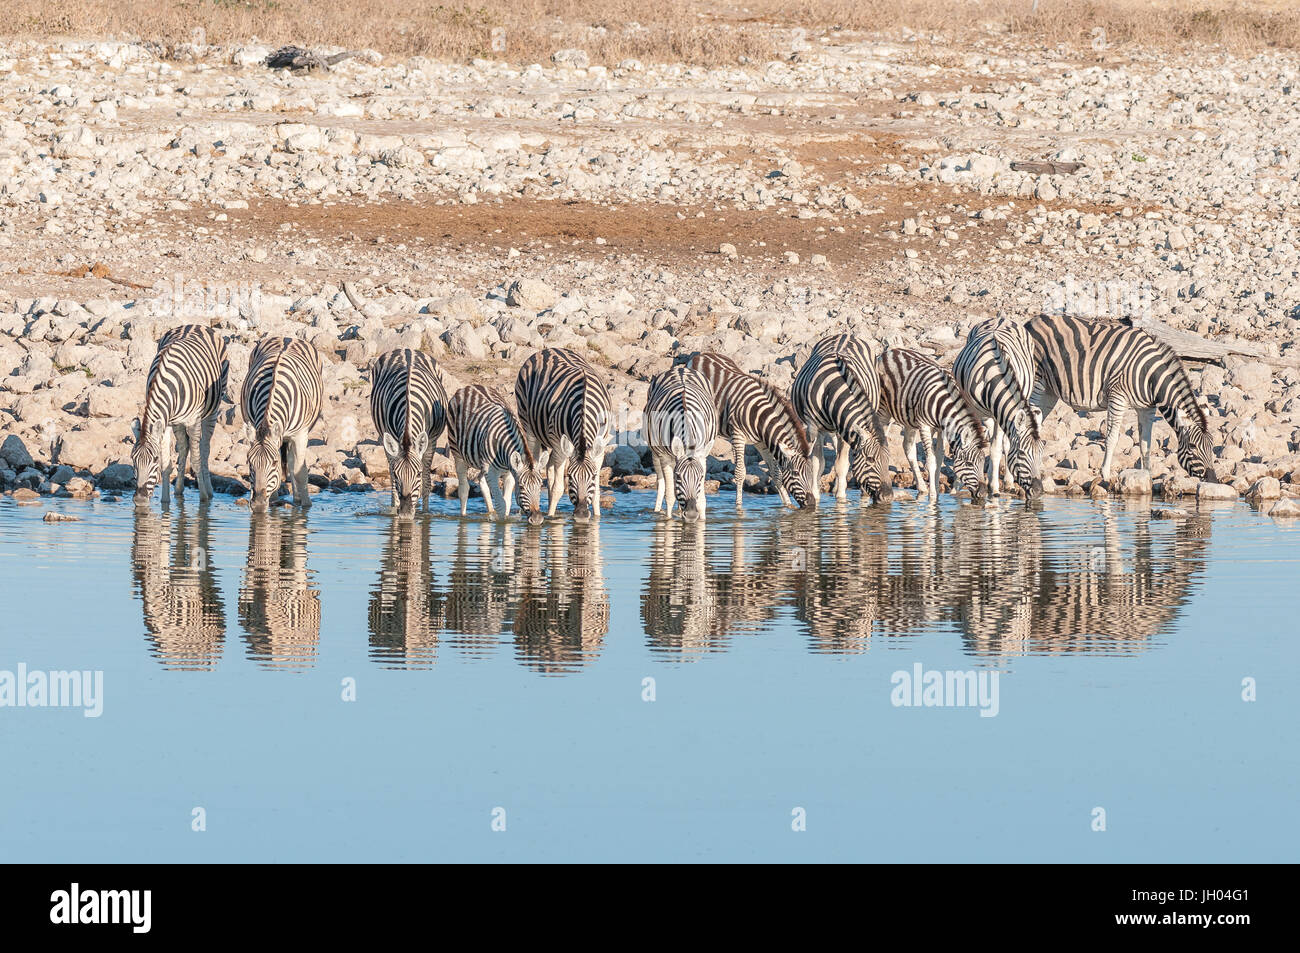 Burchells zebras, Equus quagga burchellii, with their reflections visible, drinking at a waterhole Stock Photo